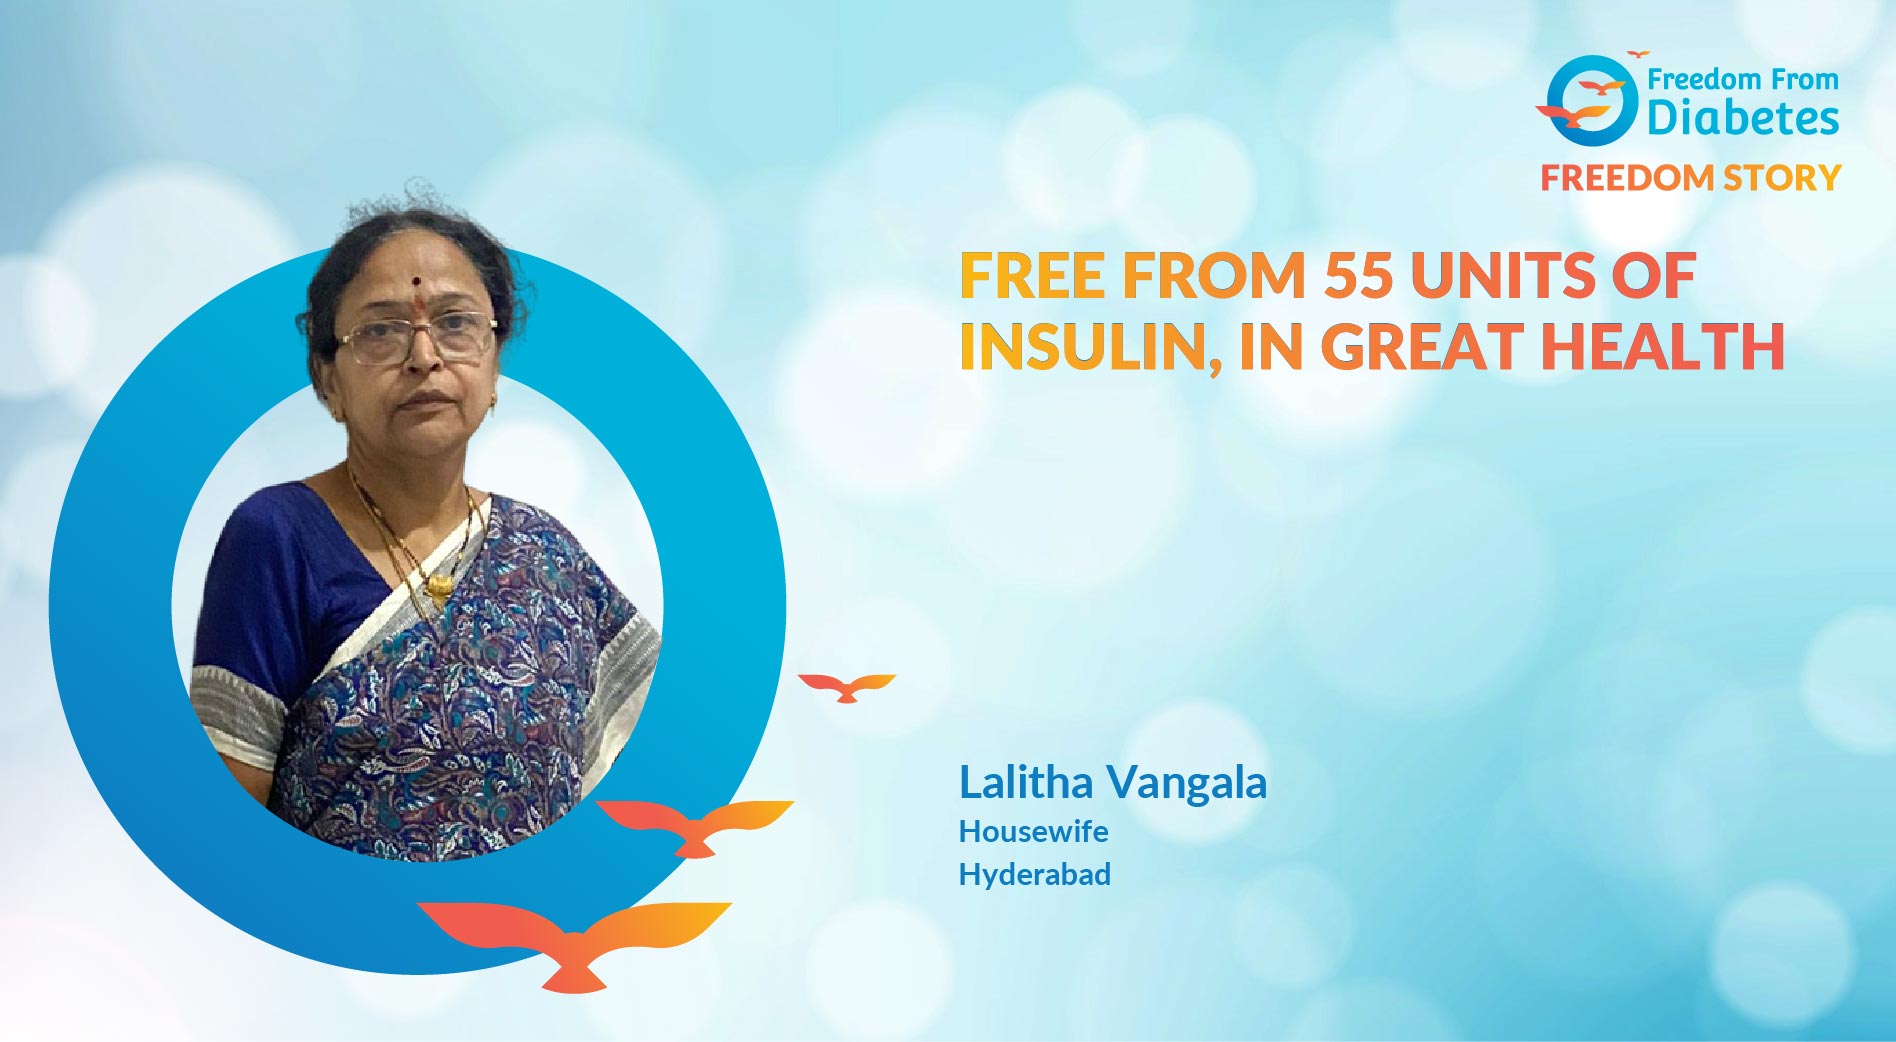 Lalitha Vangala: 31 years of insulin stopped in 20 days